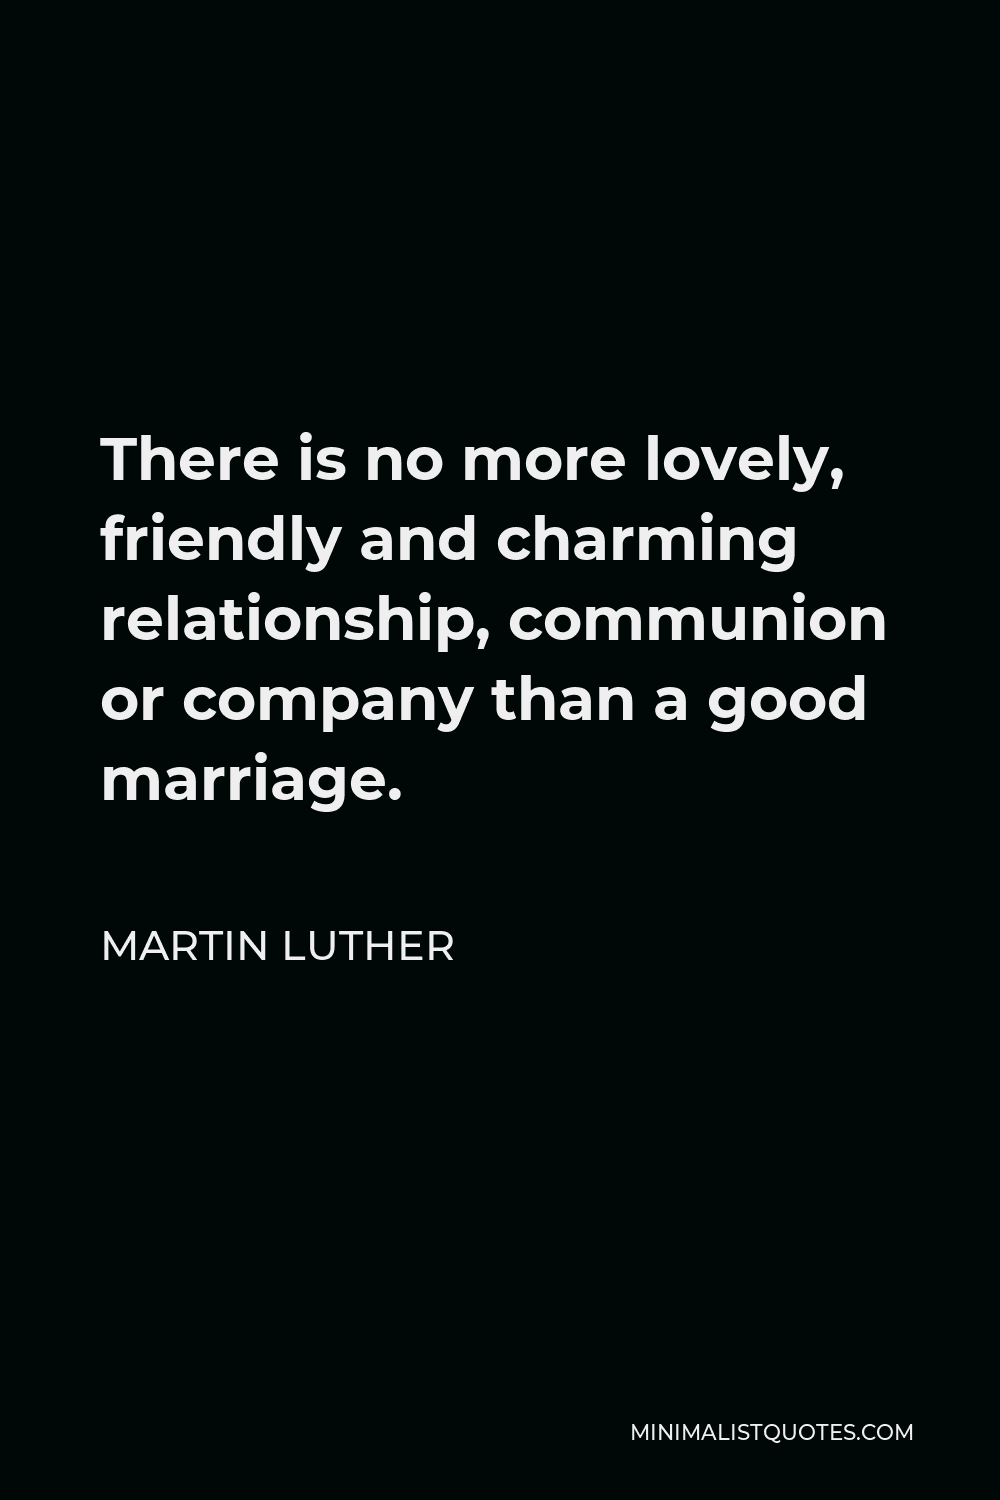 Martin Luther Quote - There is no more lovely, friendly and charming relationship, communion or company than a good marriage.